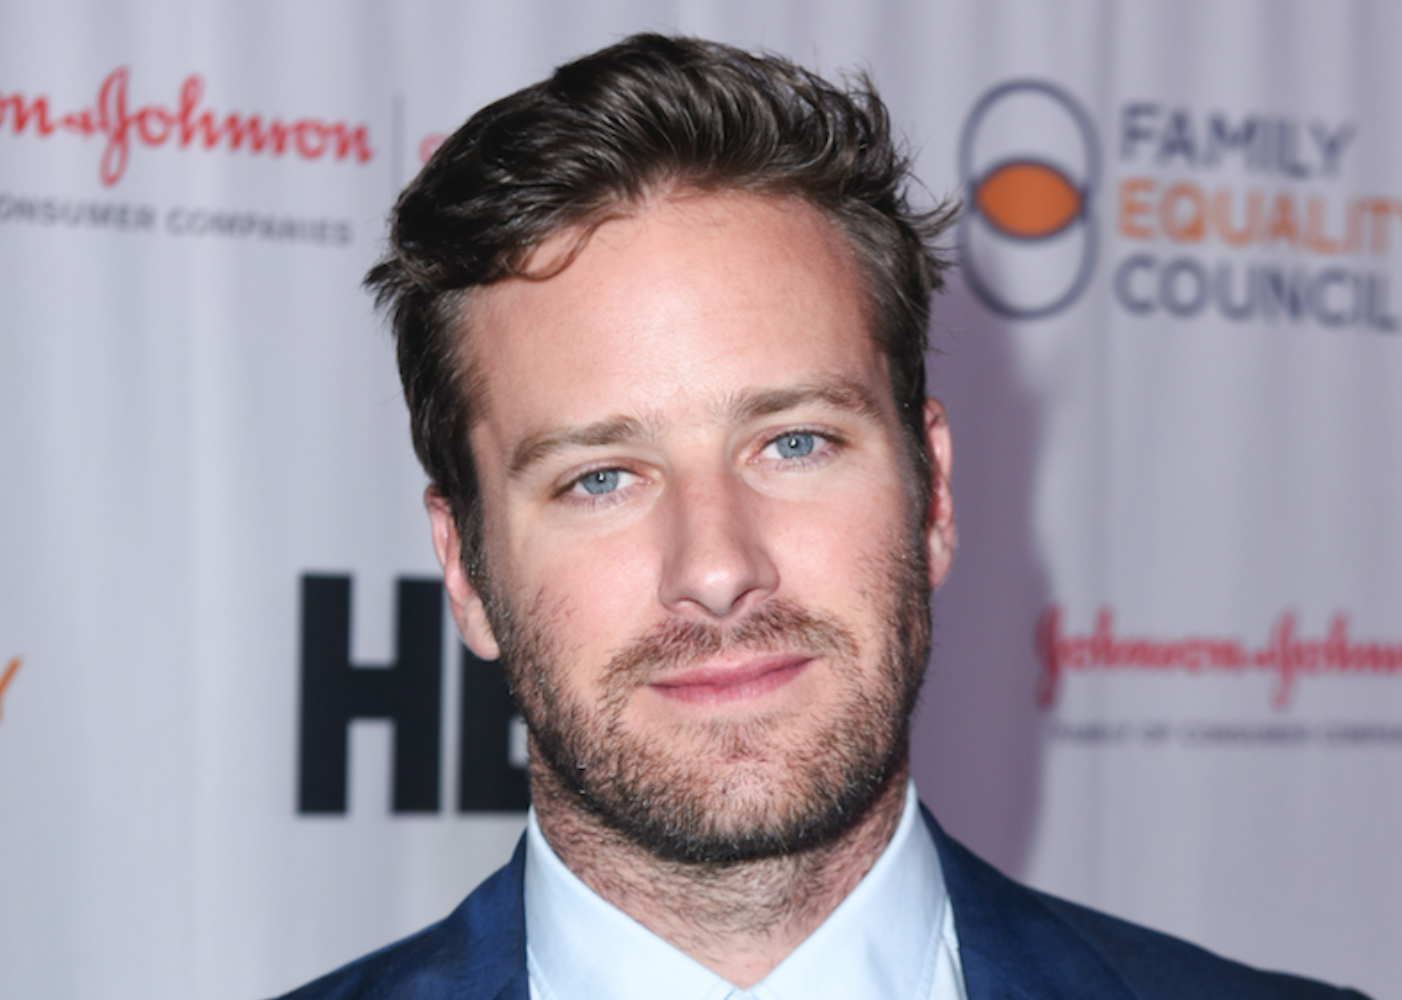 Luca Guadagnino's 'Call Me By Your Name,' Starring Armie Hammer